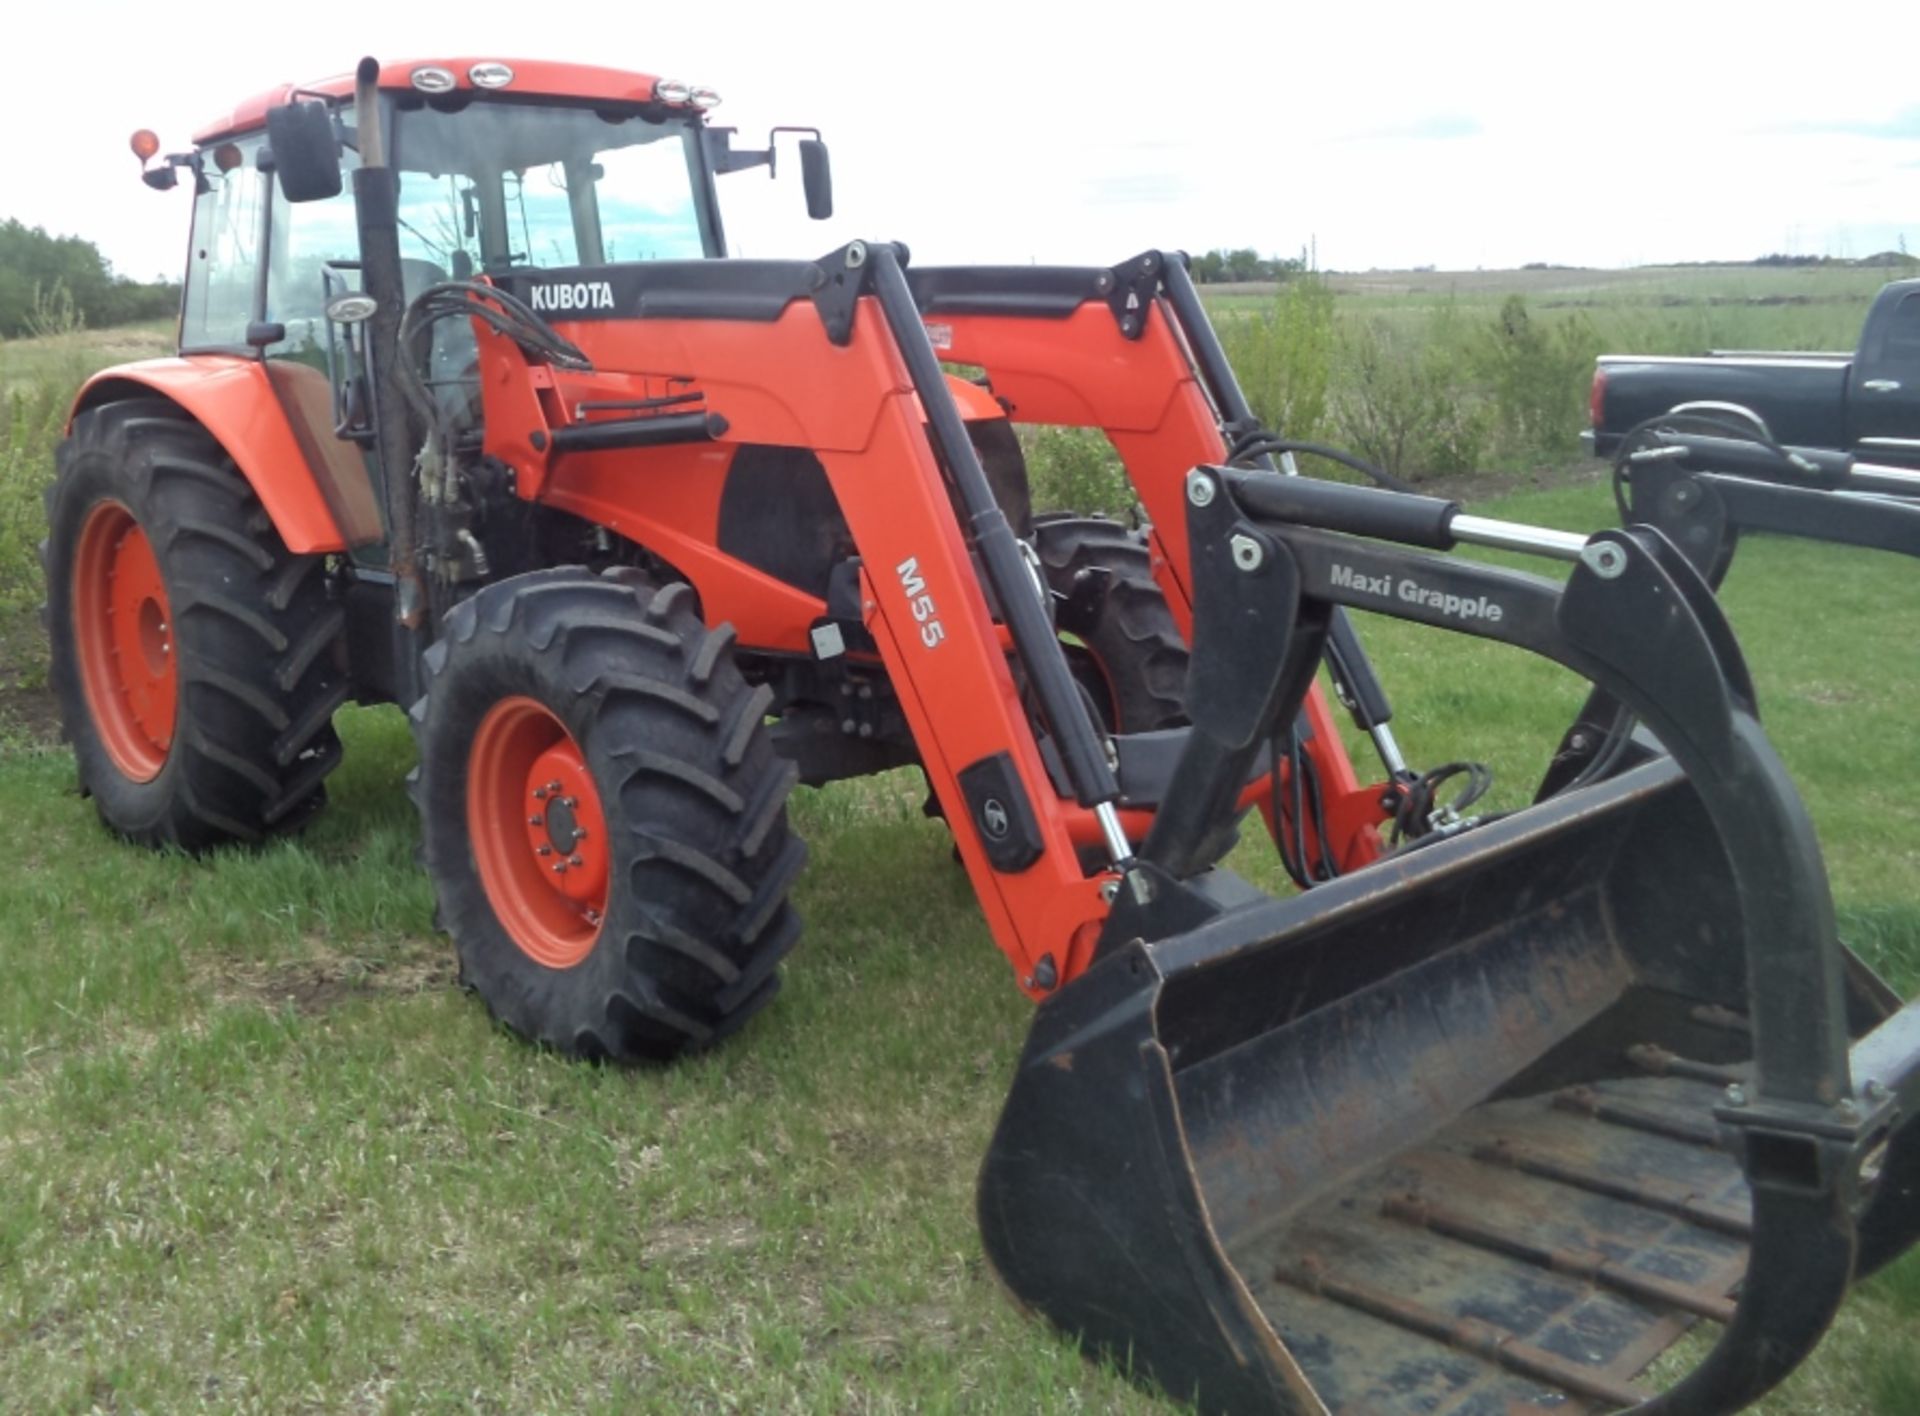 M135X Kubota MFWD Diesel Tractor, M55 Loader & Grapple, New Radial tires, 3 pth, shows 2290 hrs, - Image 2 of 4